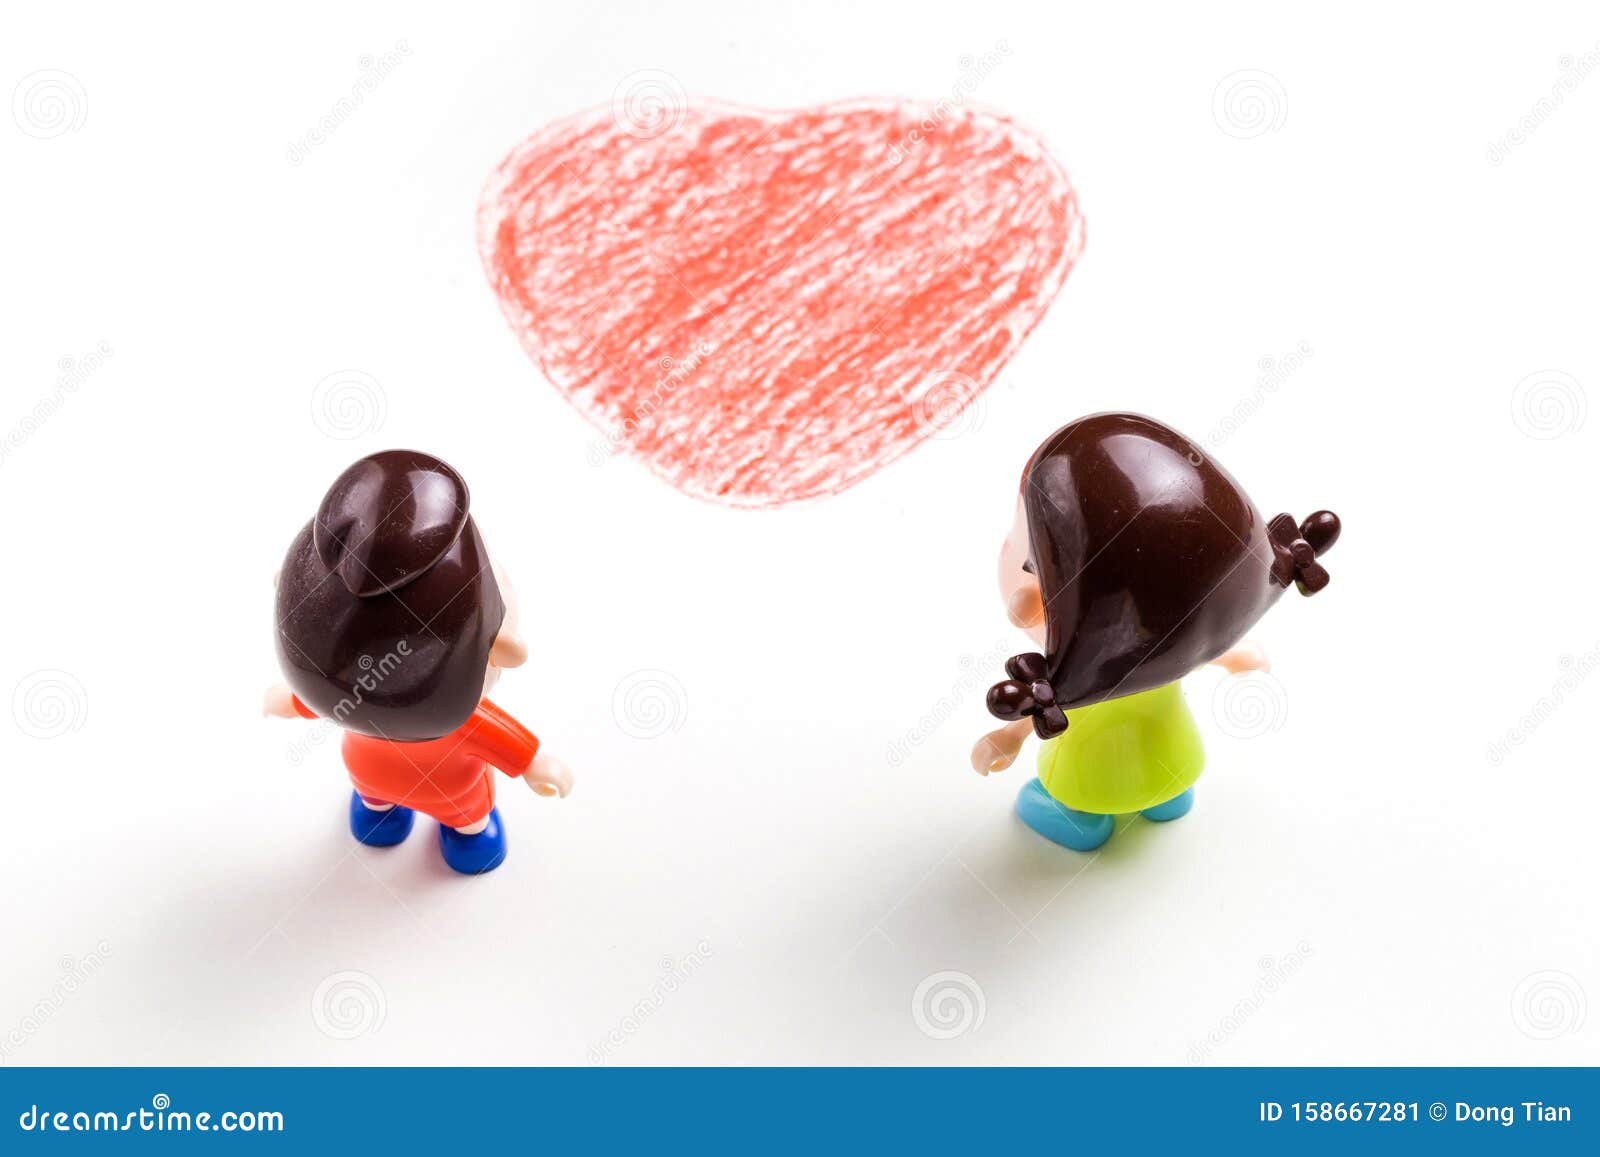 Two Cartoon Dolls on Drawing Paper Stock Image - Image of ...